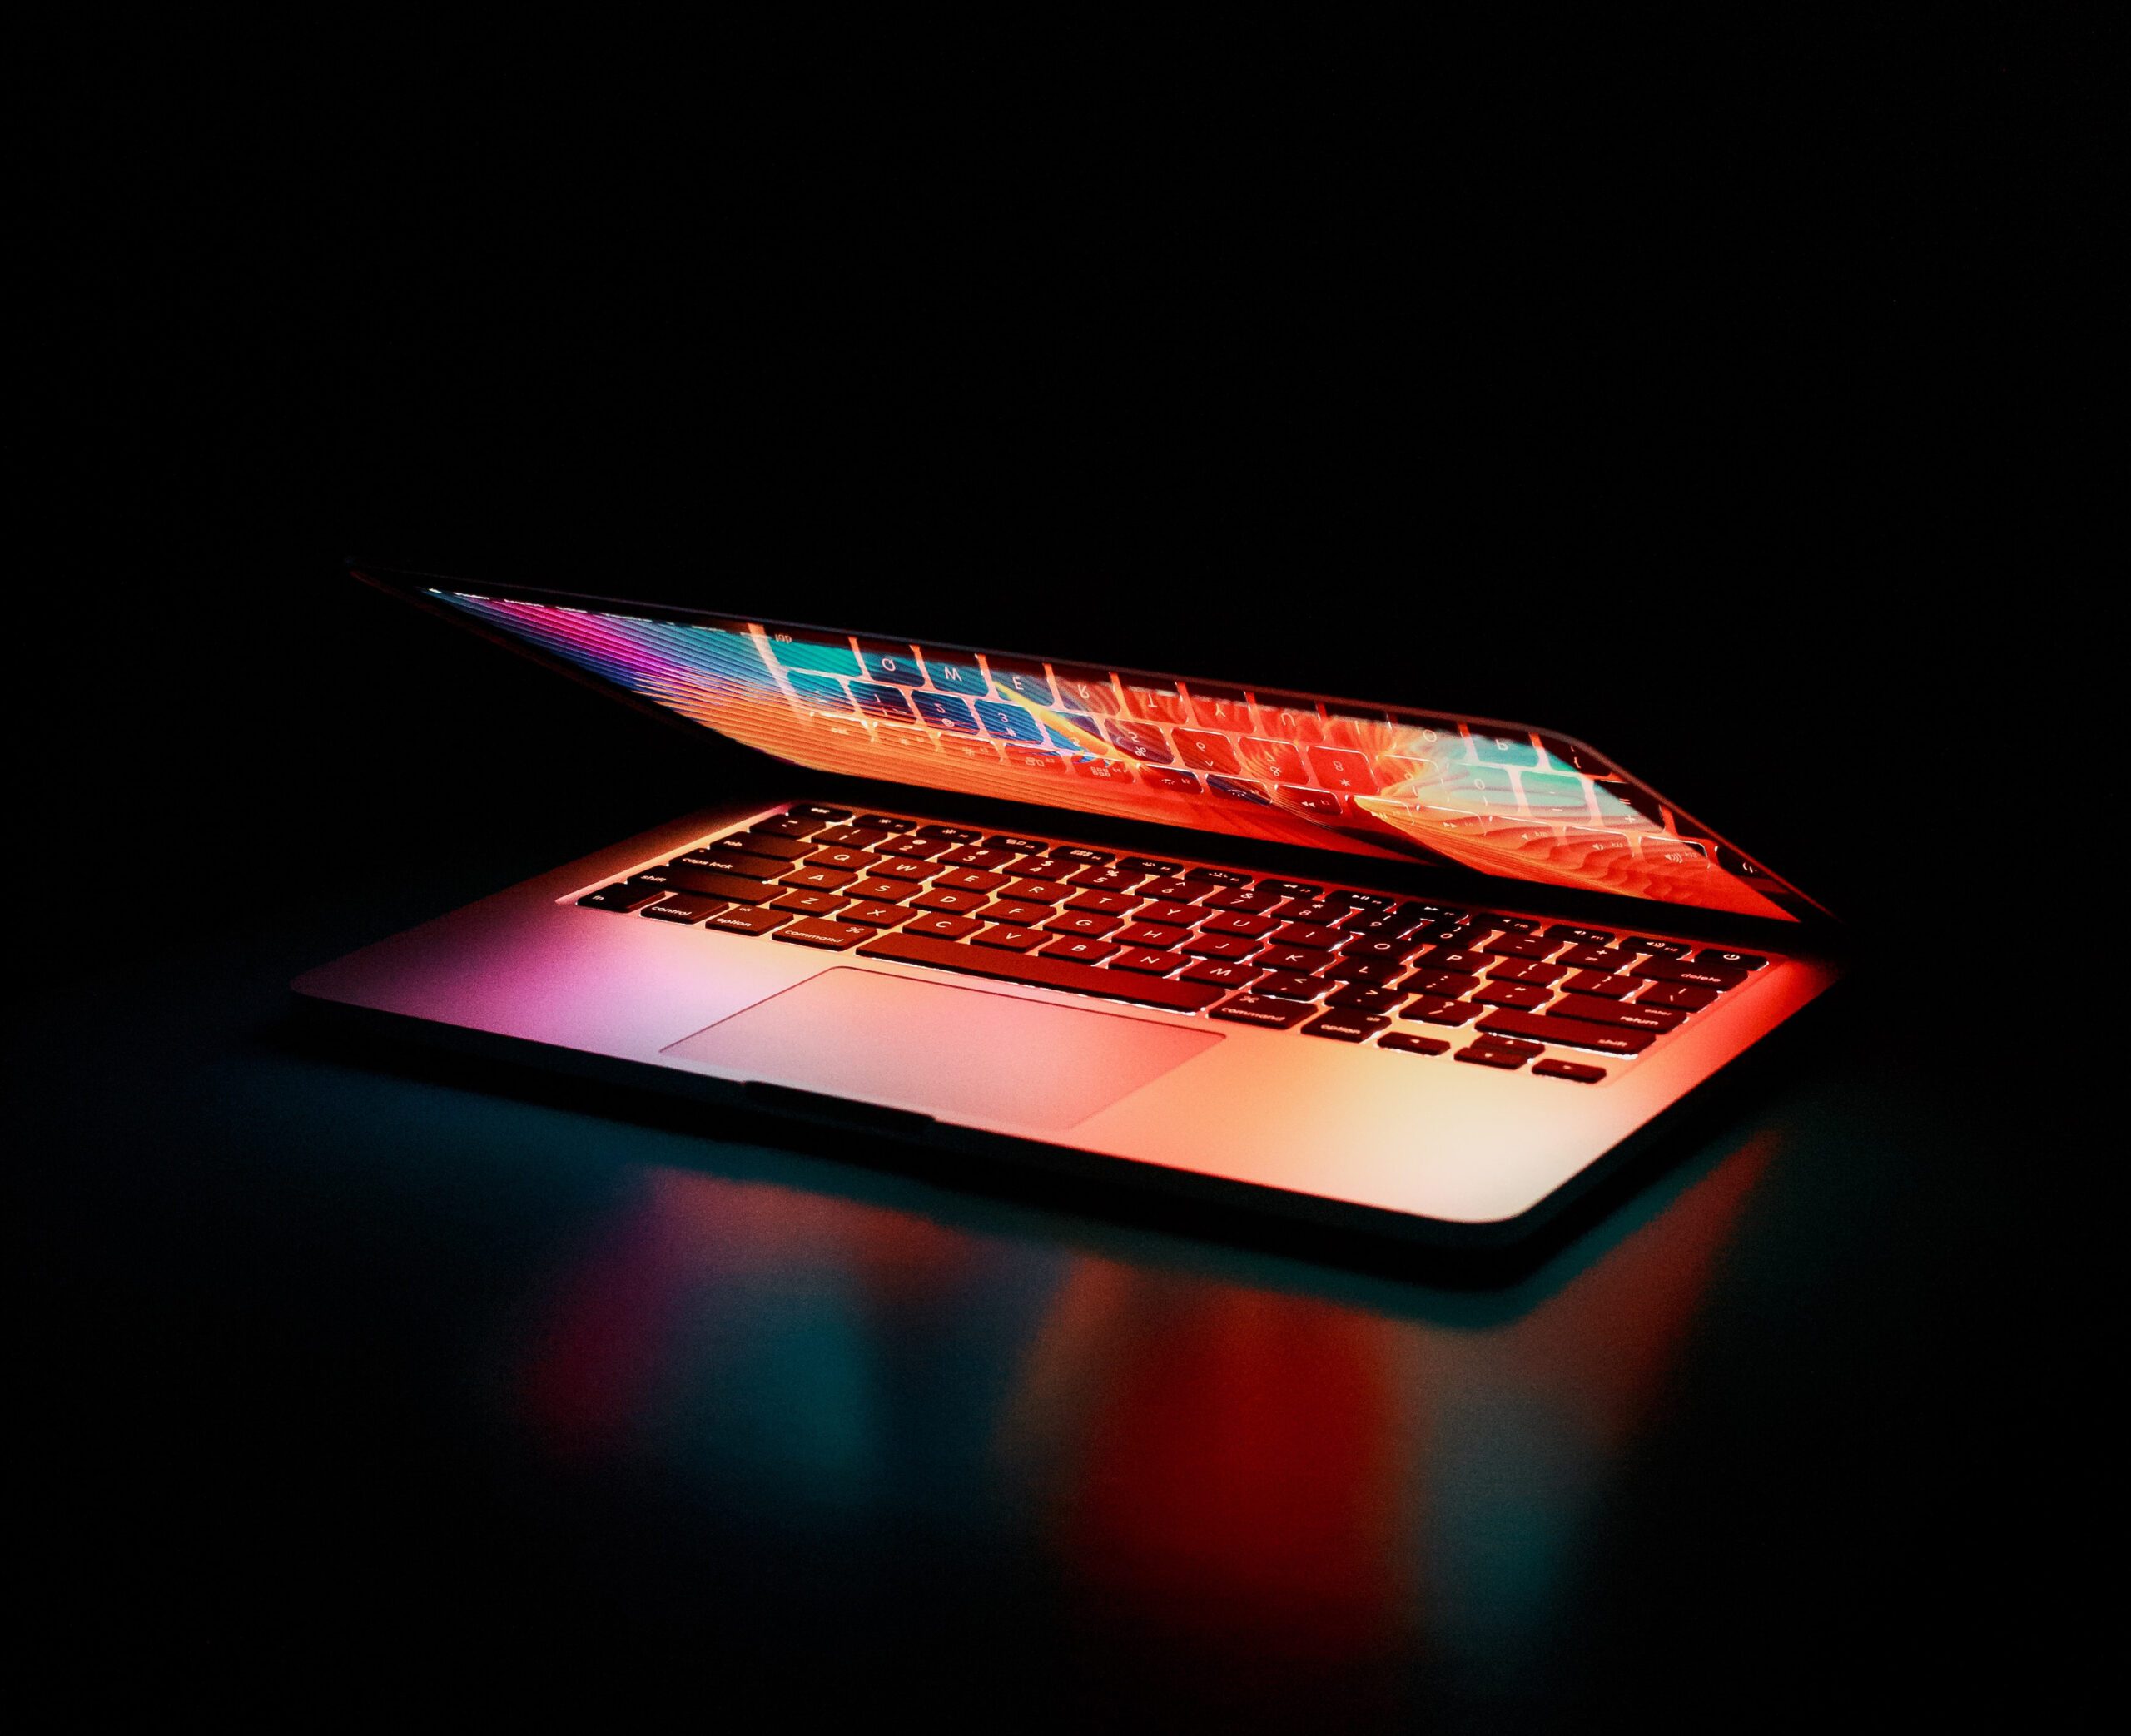 Design creative work at a glowing laptop